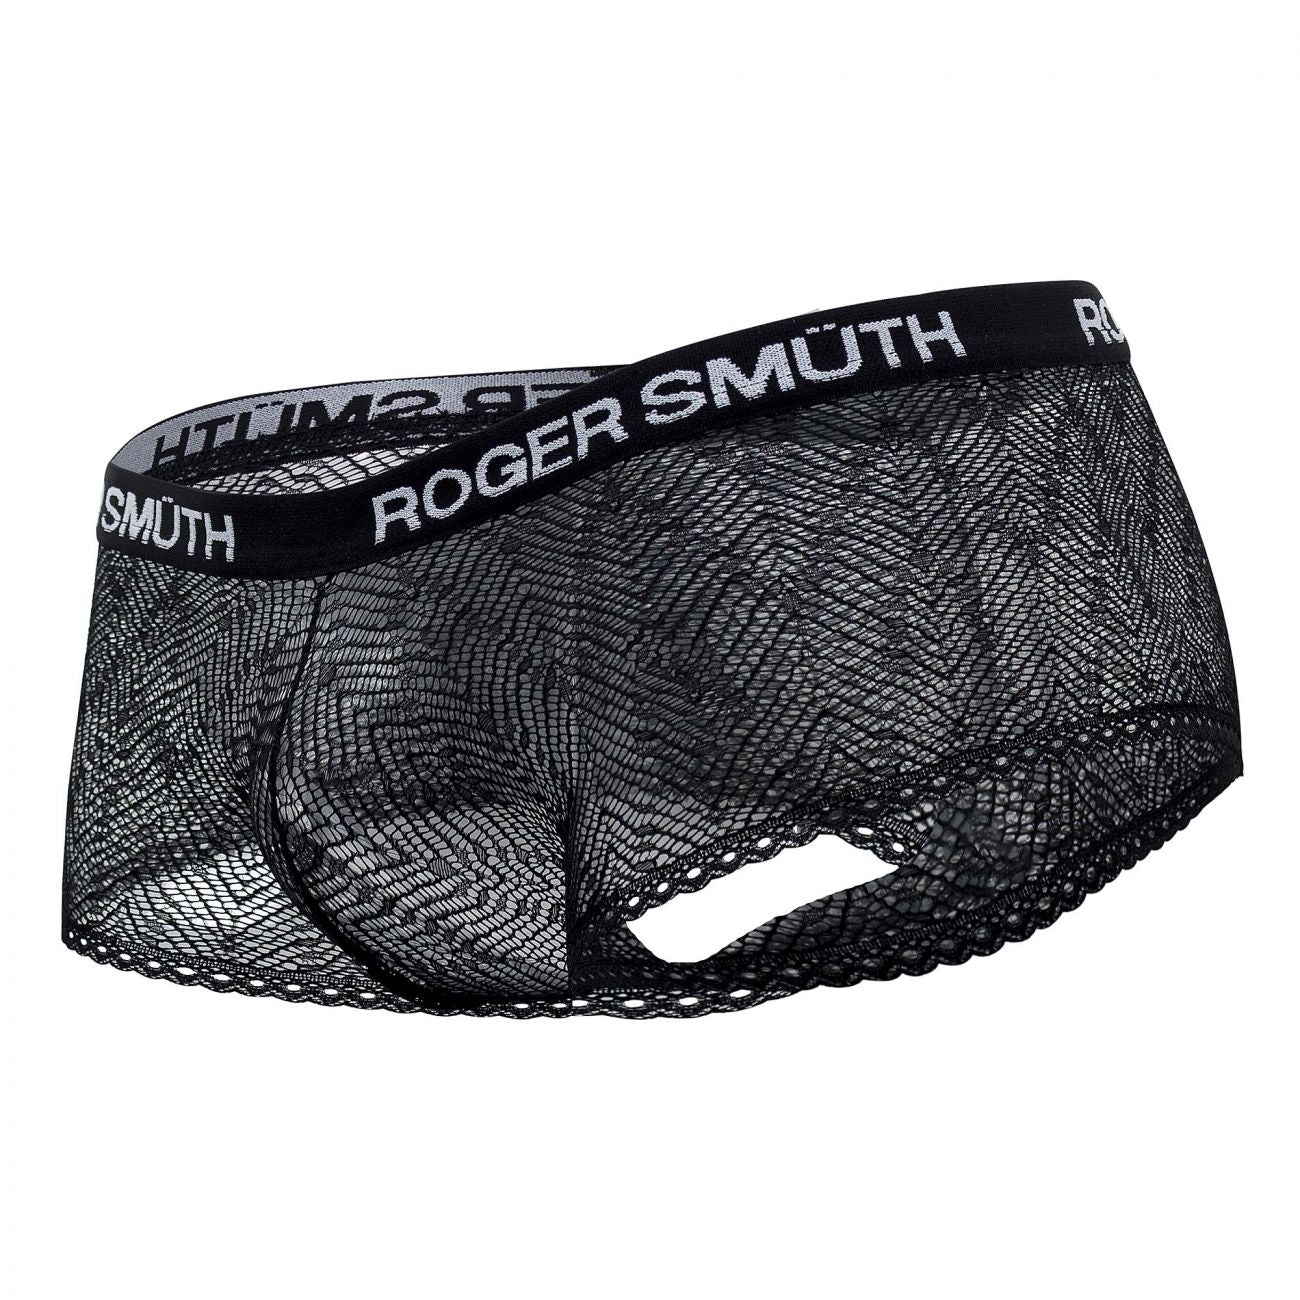 Roger Smuth RS003 Briefs Black